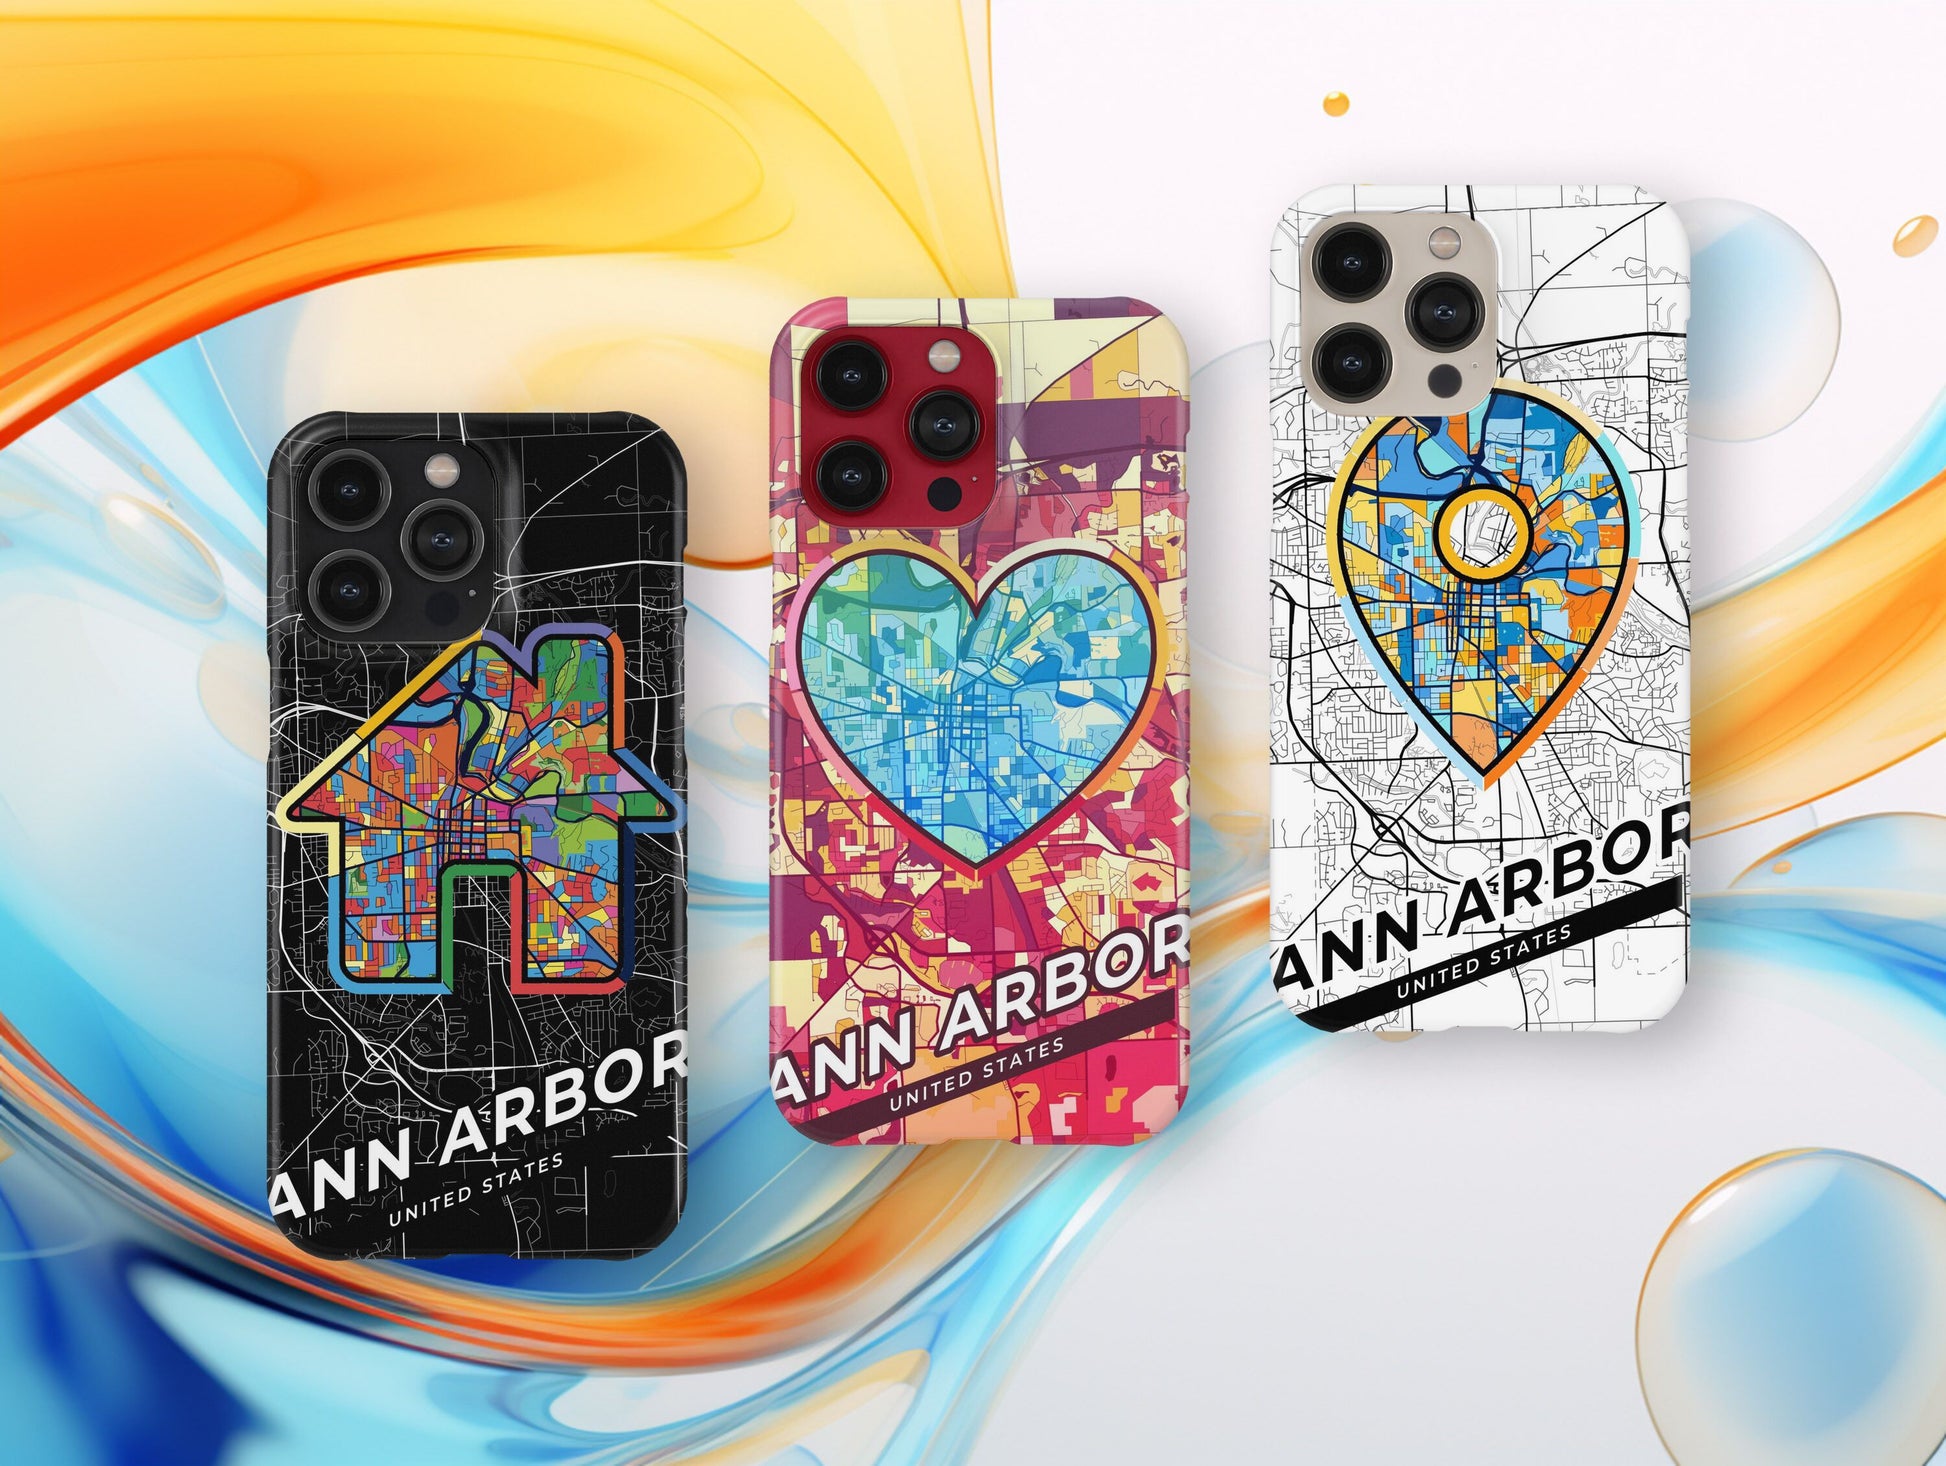 Ann Arbor Michigan slim phone case with colorful icon. Birthday, wedding or housewarming gift. Couple match cases.